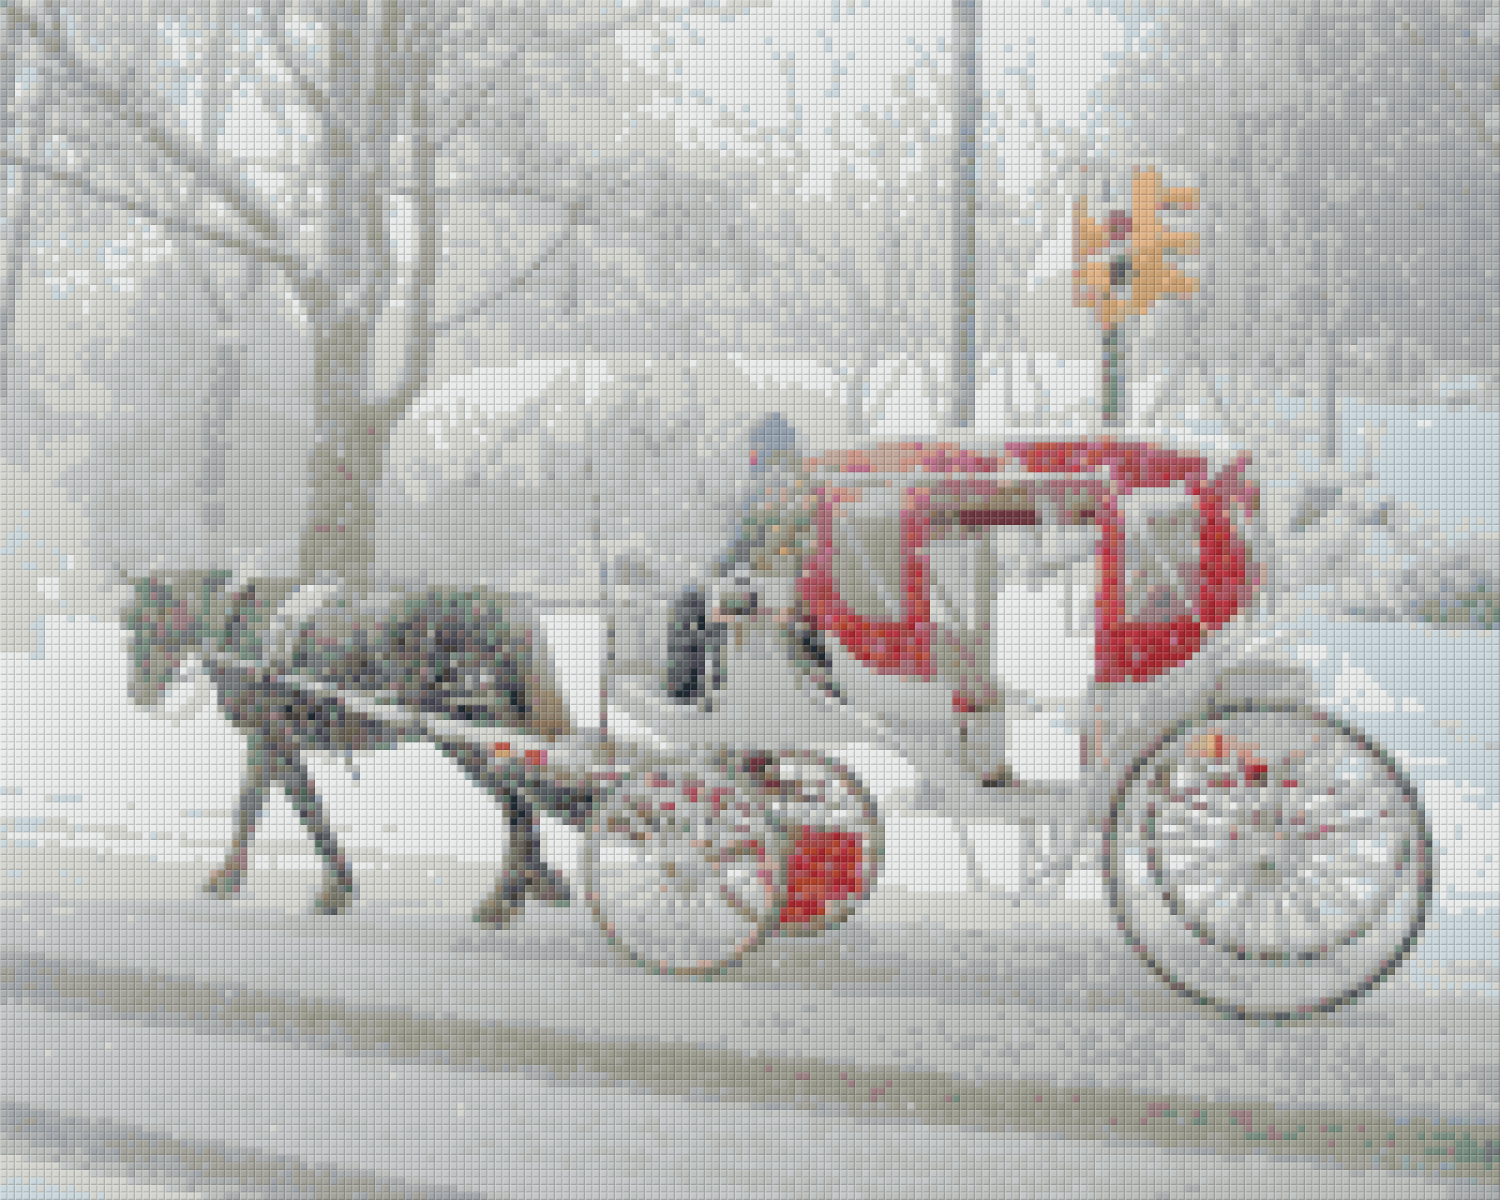 Pixelhobby classic set - carriage ride in the snow